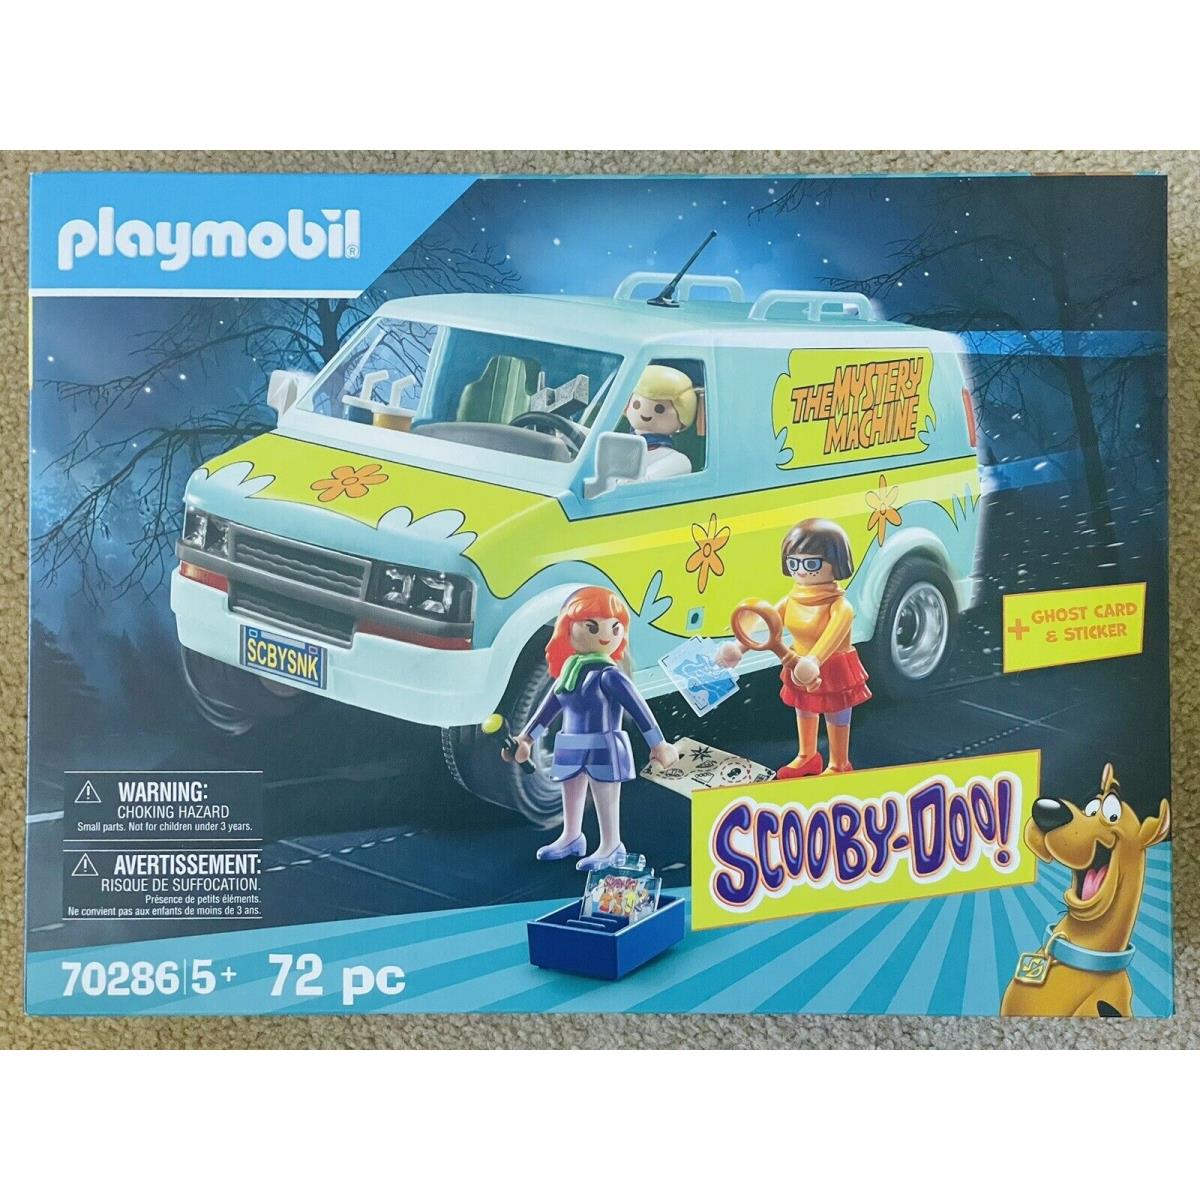 Playmobil Scooby Doo Mystery Machine 70286 3 Figs Ghost Card